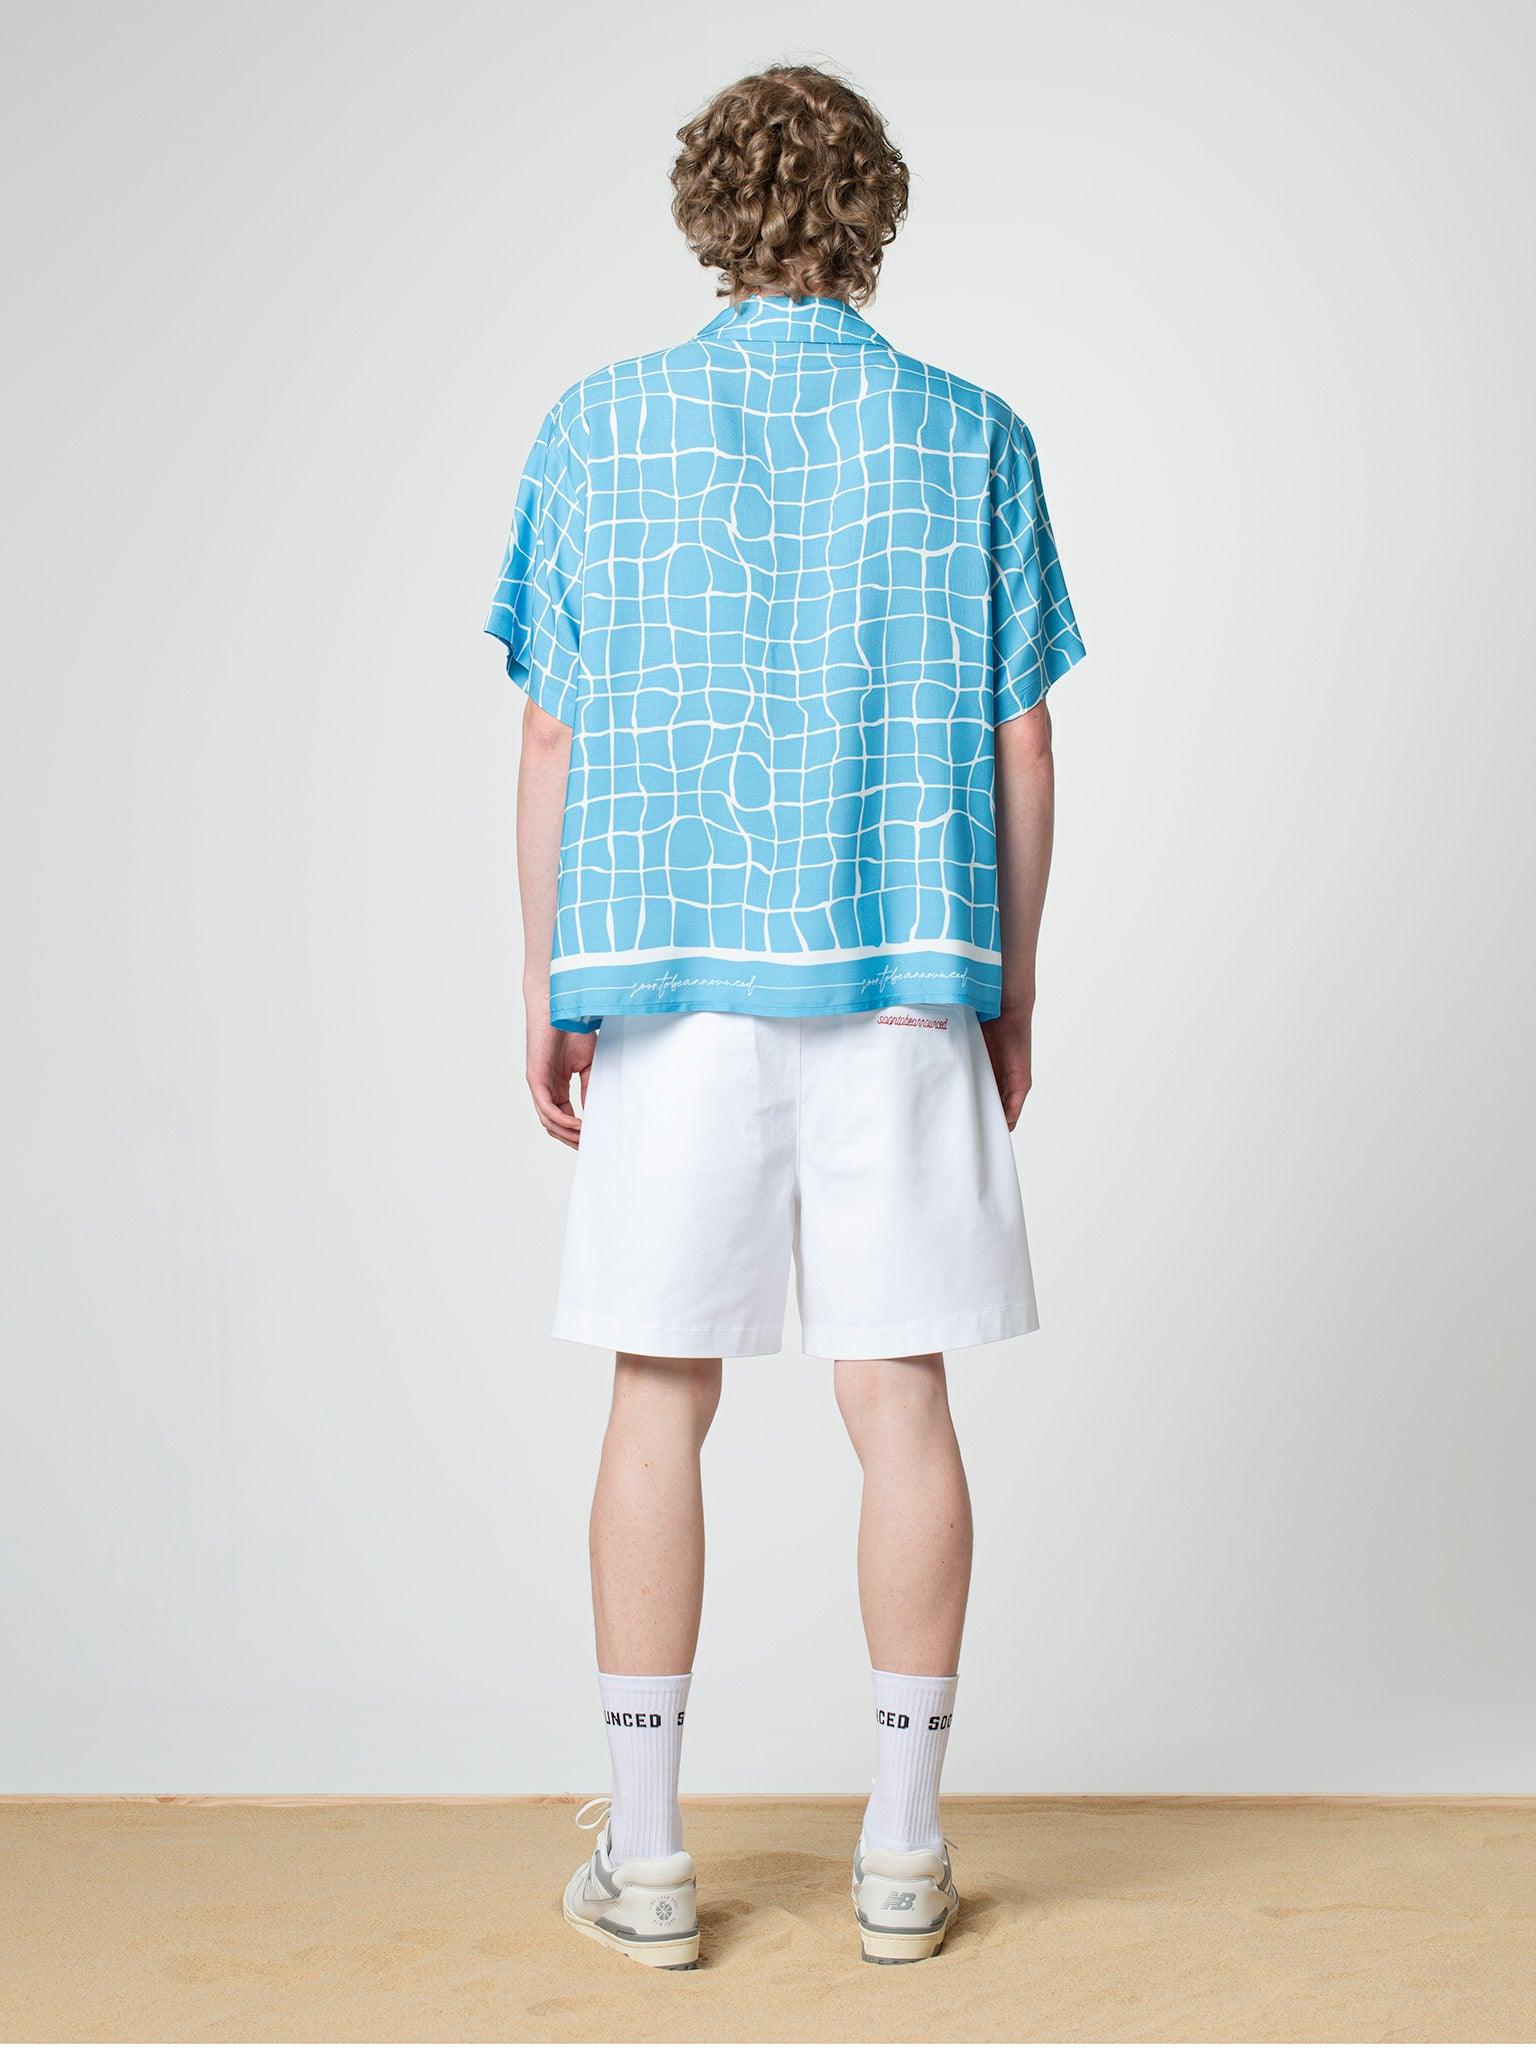 Pool Tile Bowling Shirt - SOON TO BE ANNOUNCED